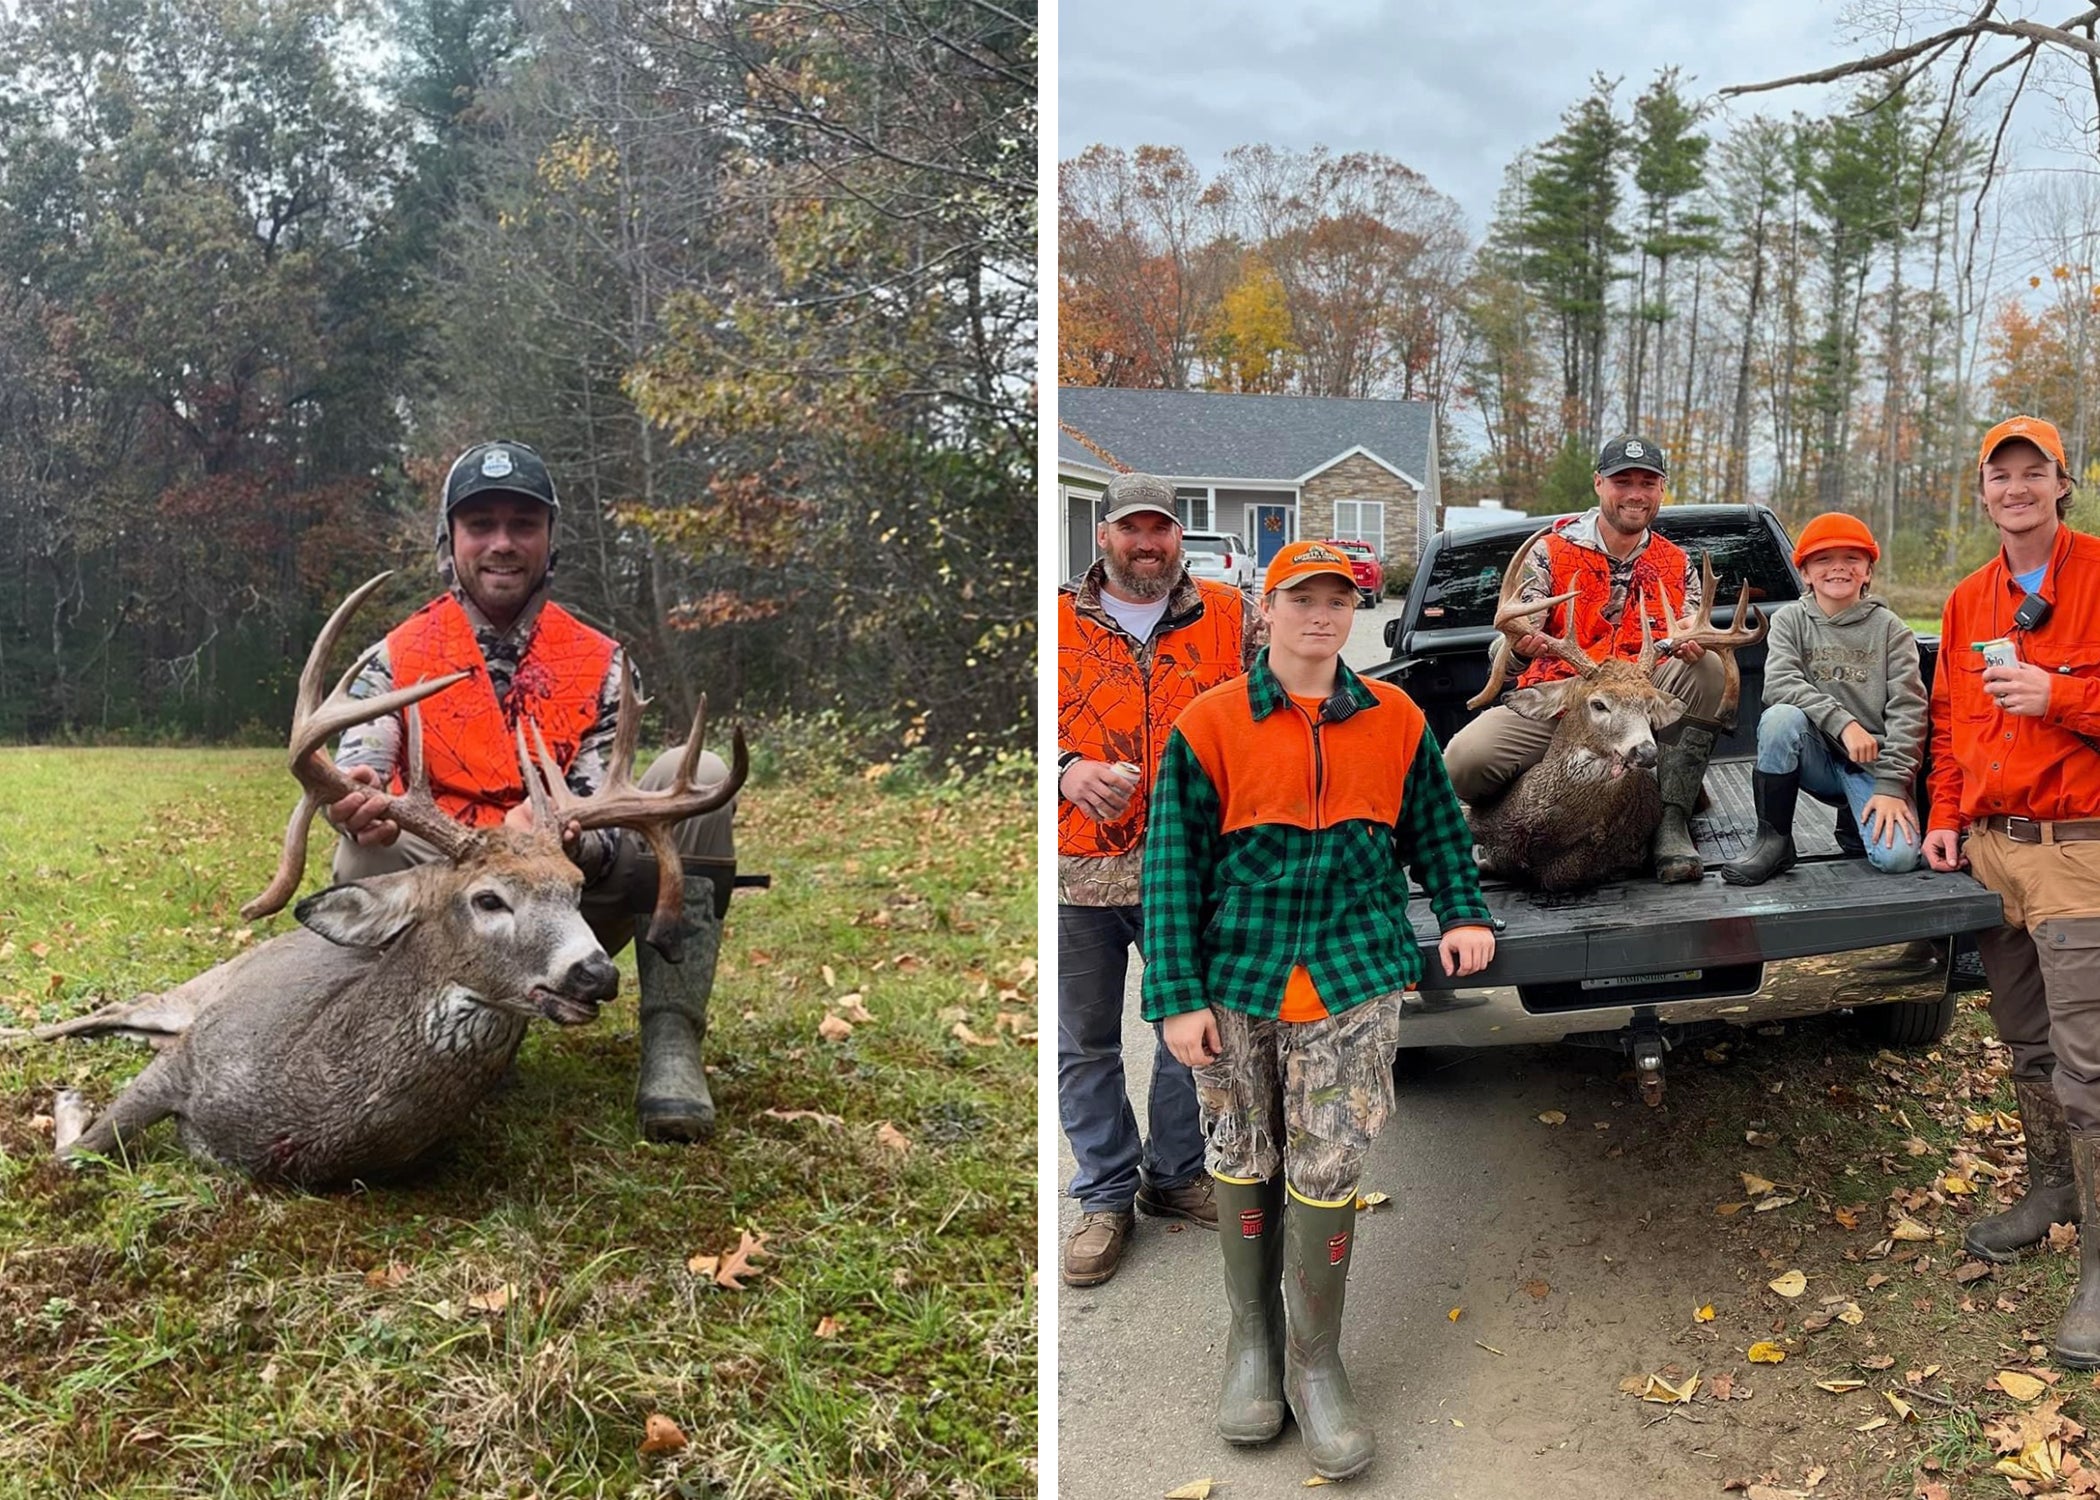 Left: Hunter poses with huge whitetail buck. Right: Hunter with his buddies post with the deer.